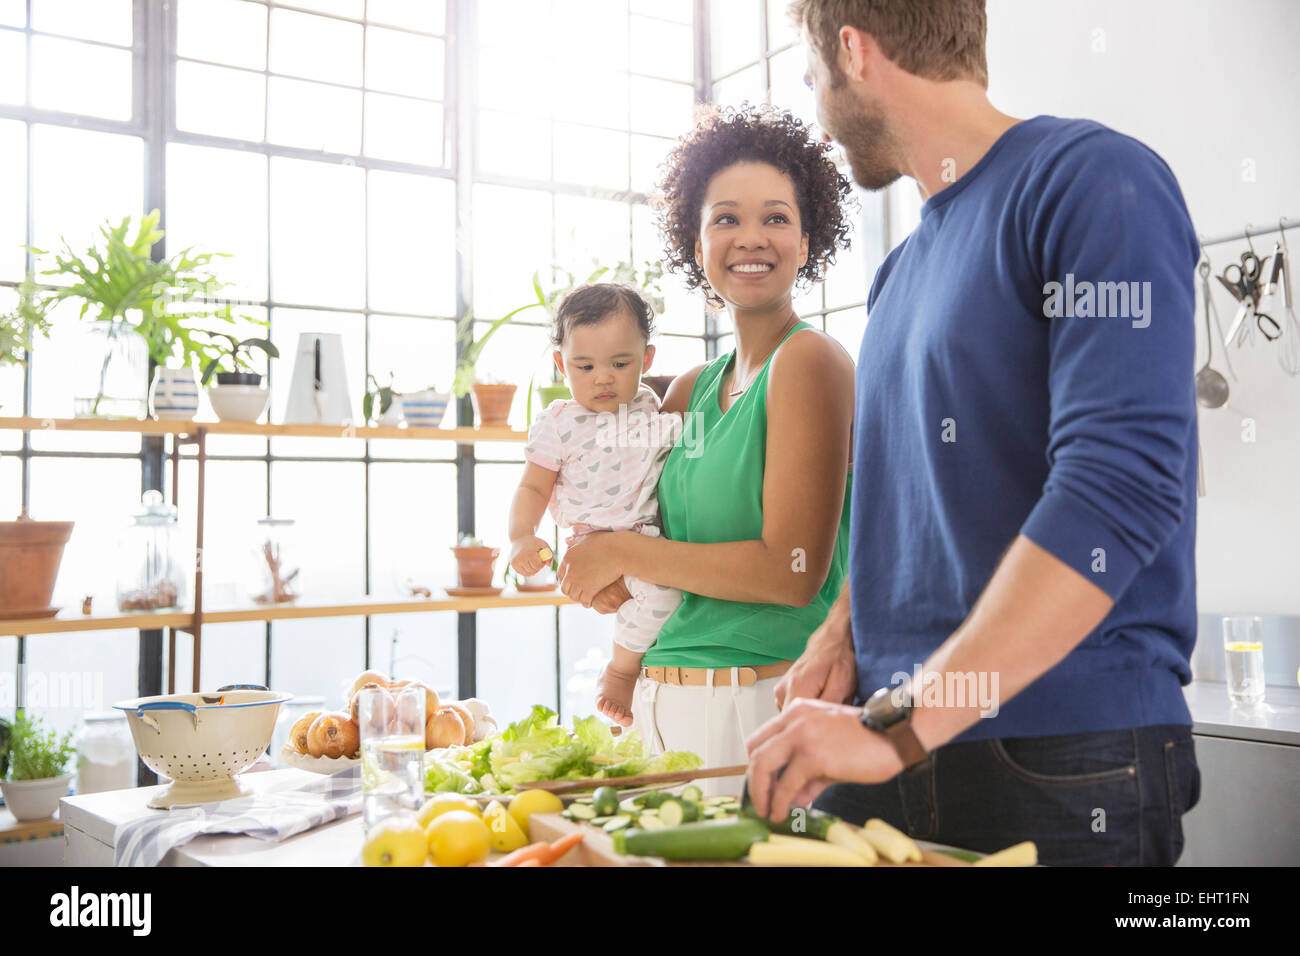 Happy Family preparing meal in domestic kitchen Banque D'Images